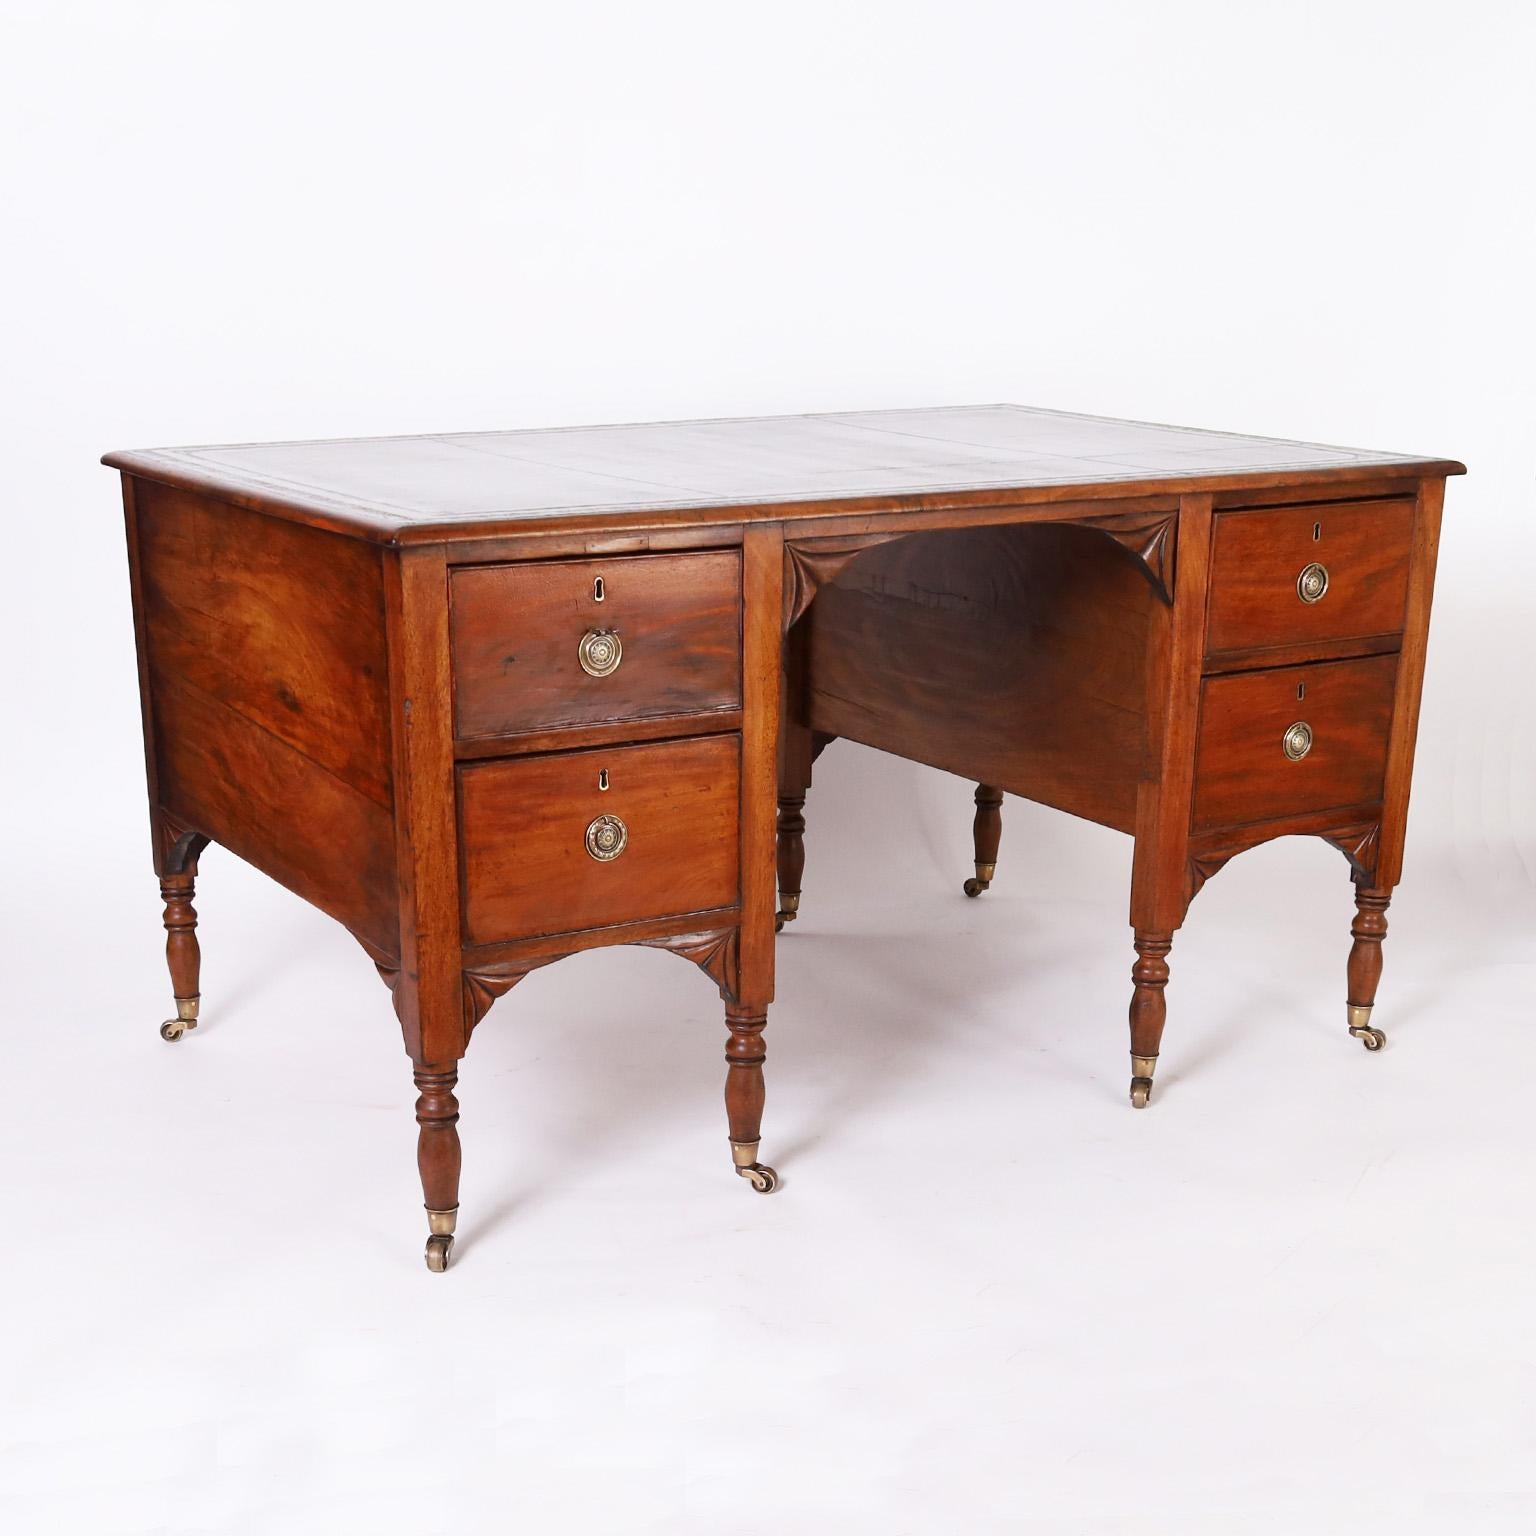 Hand-Crafted English Tooled Green Leather Top Partners Desk For Sale